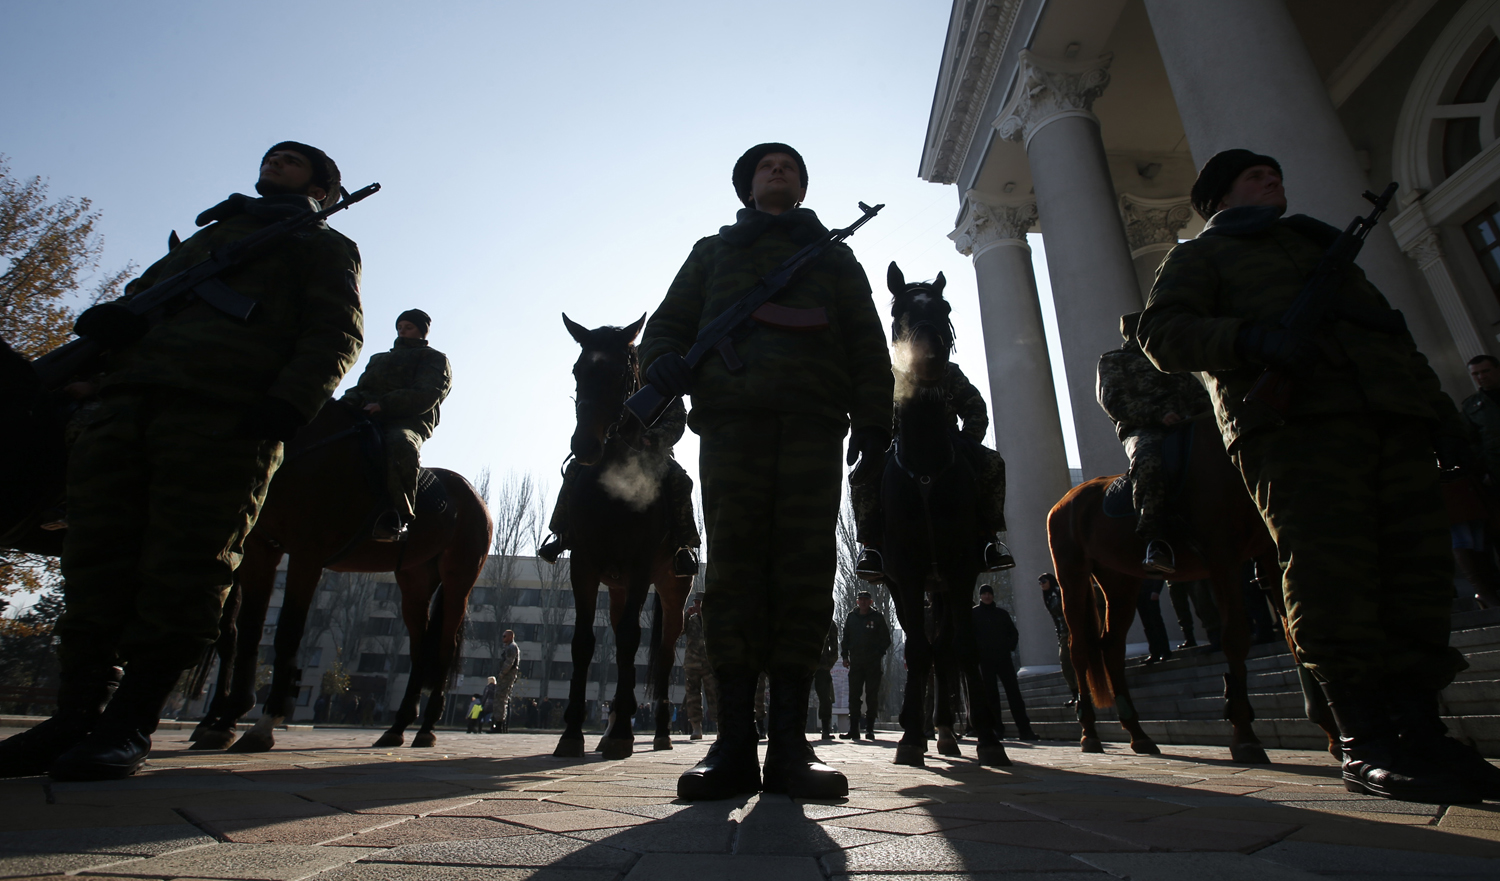 Members of an honour guard hold their weapons as they wait for the arrival of separatist leader Zakharchenko in front of a theatre in Donetsk